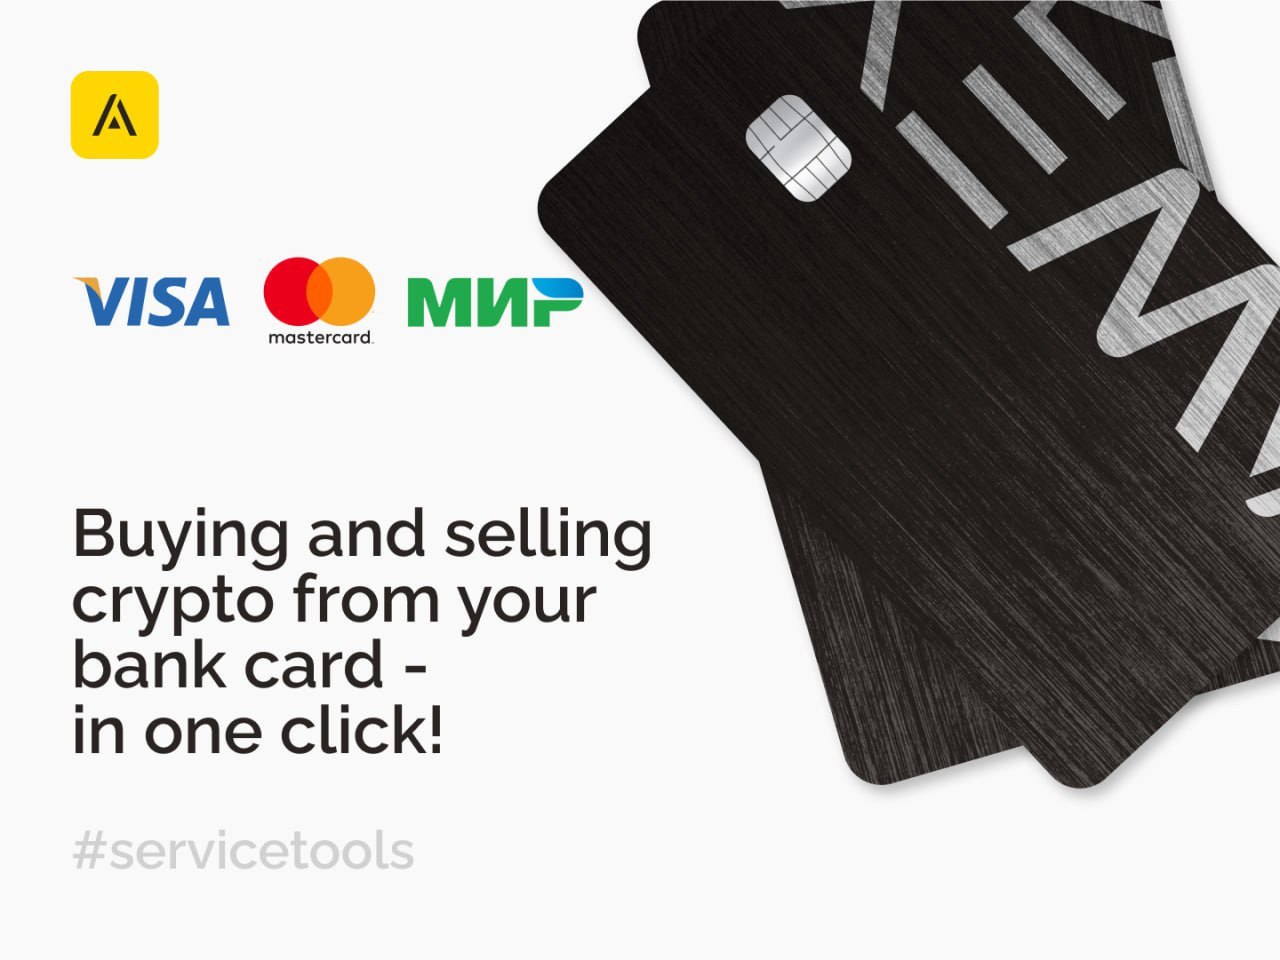 Payment of cryptocurrency by card